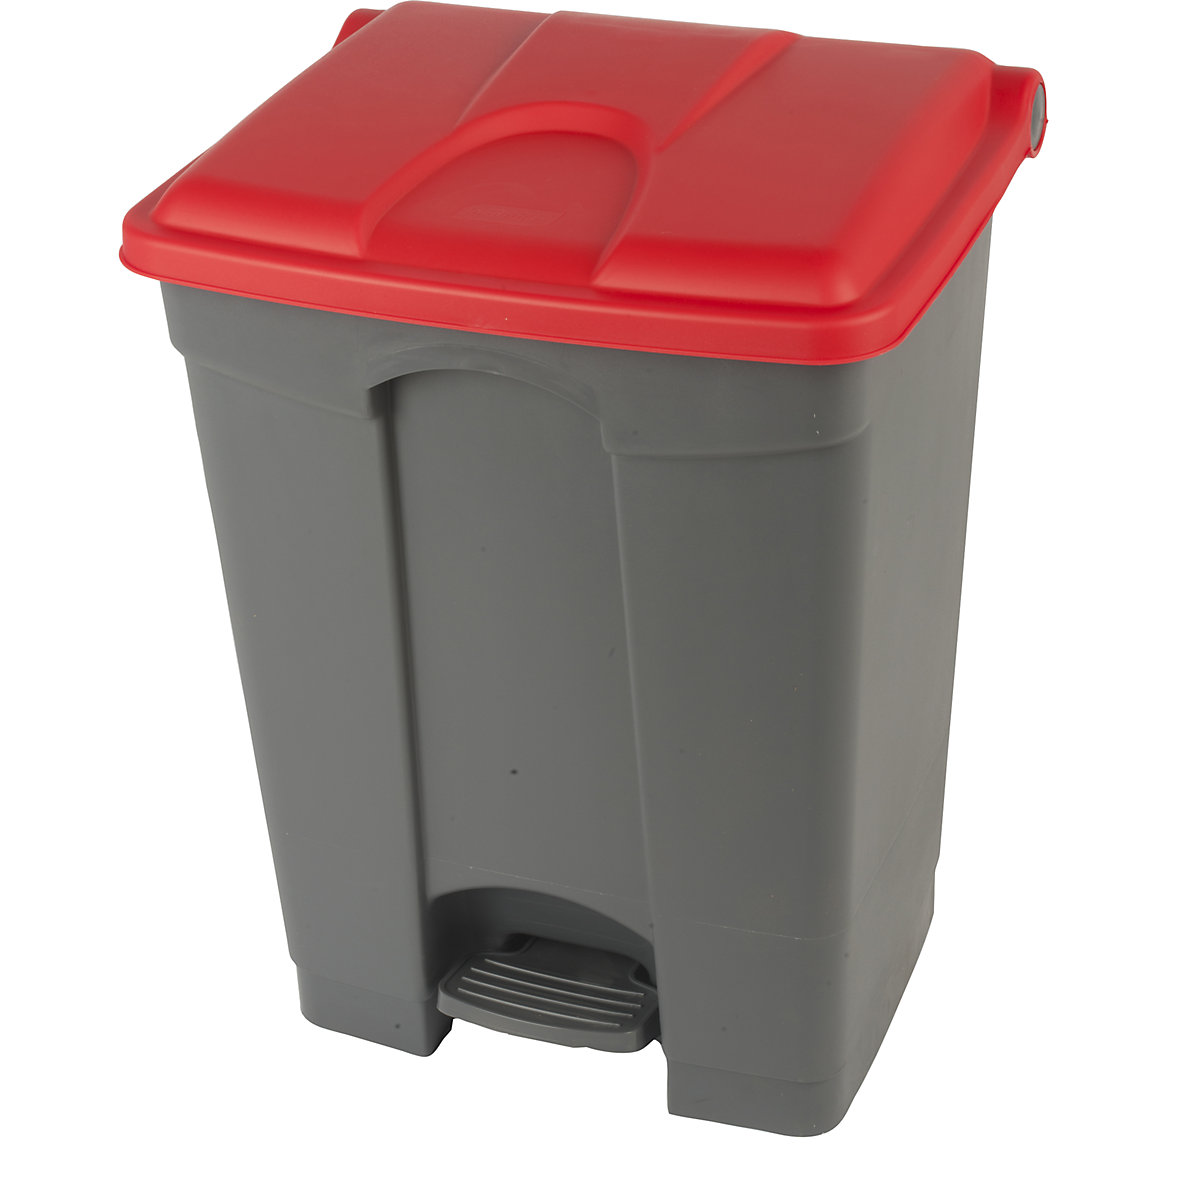 EUROKRAFTbasic – Pedal waste collector, capacity 70 l, WxHxD 505 x 675 x 415 mm, grey, red lid